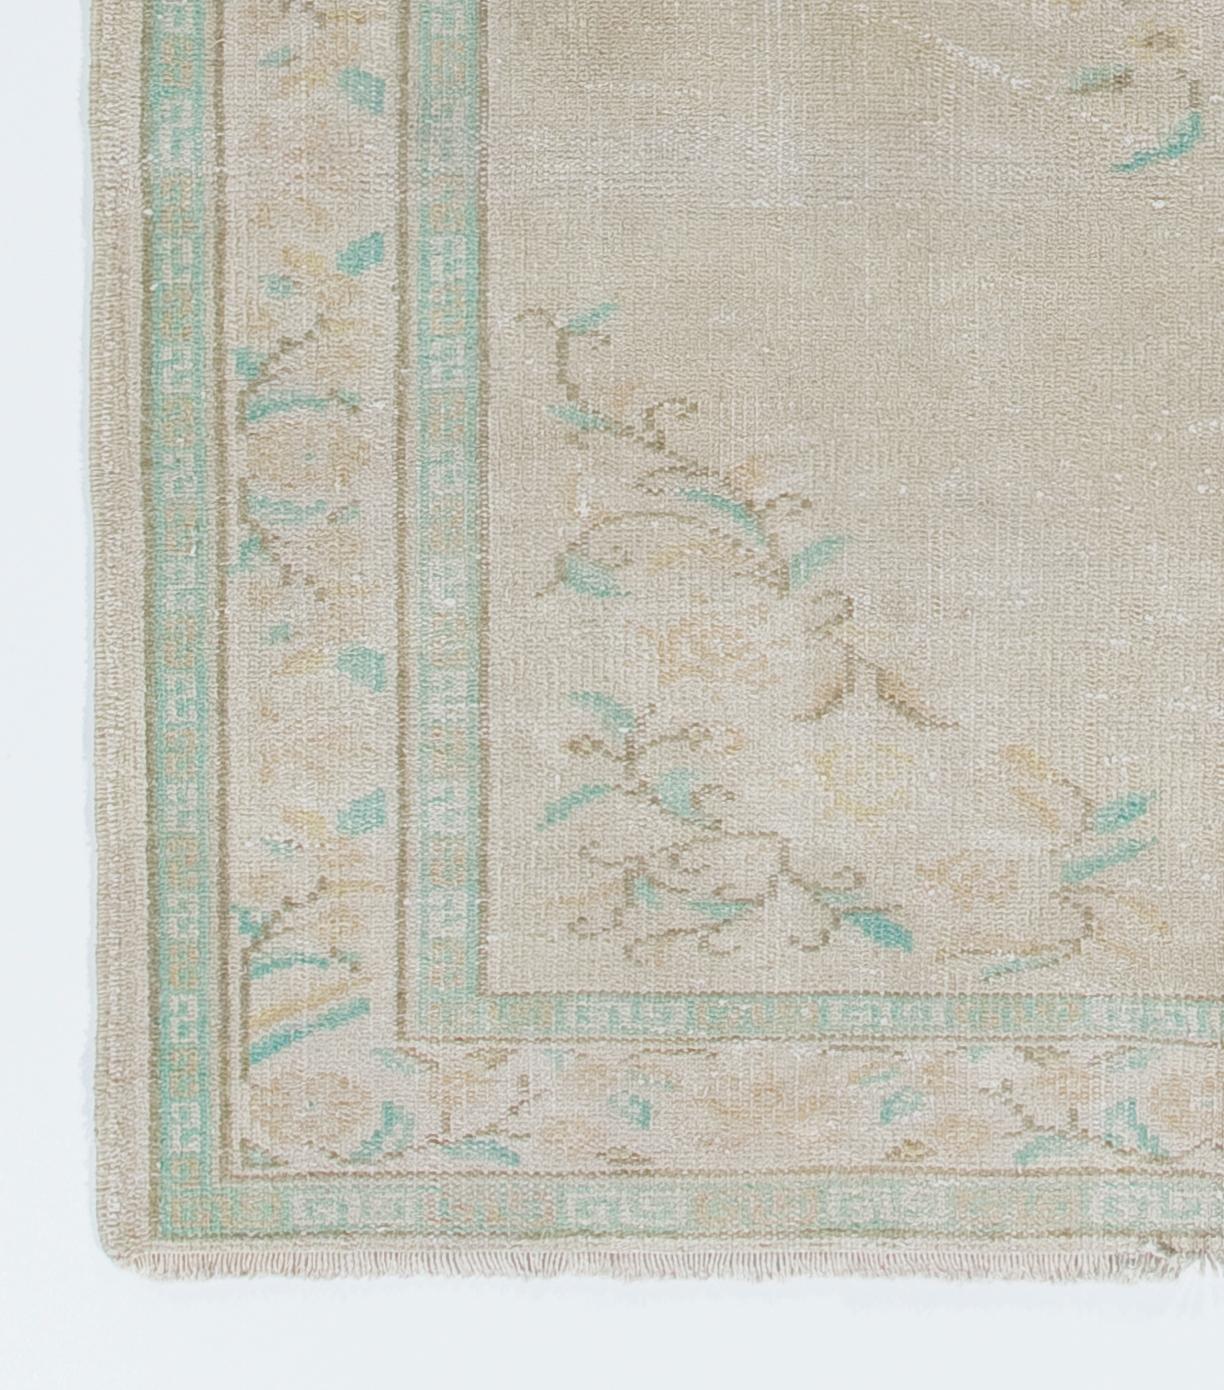 Wool 5x8.8 Ft Art Deco Chinese Inspired Vintage Handmade Turkish Faded Rug. Room-Size For Sale